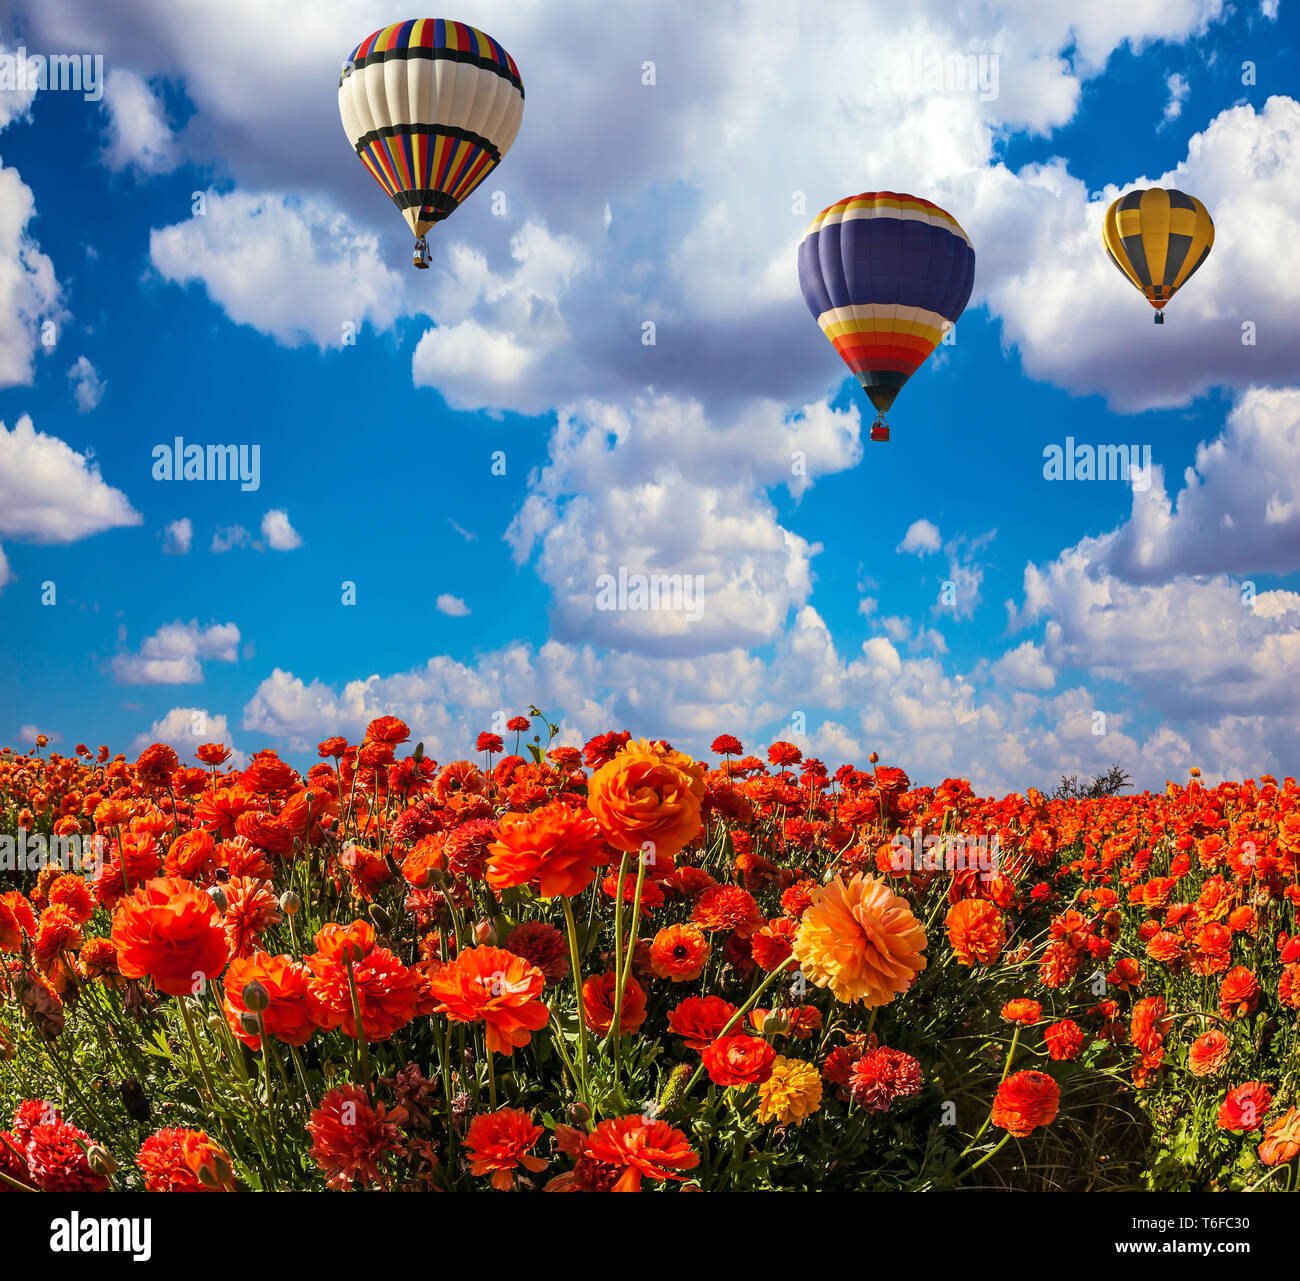 Two multi-color balloons flying Stock Photo - Alamy